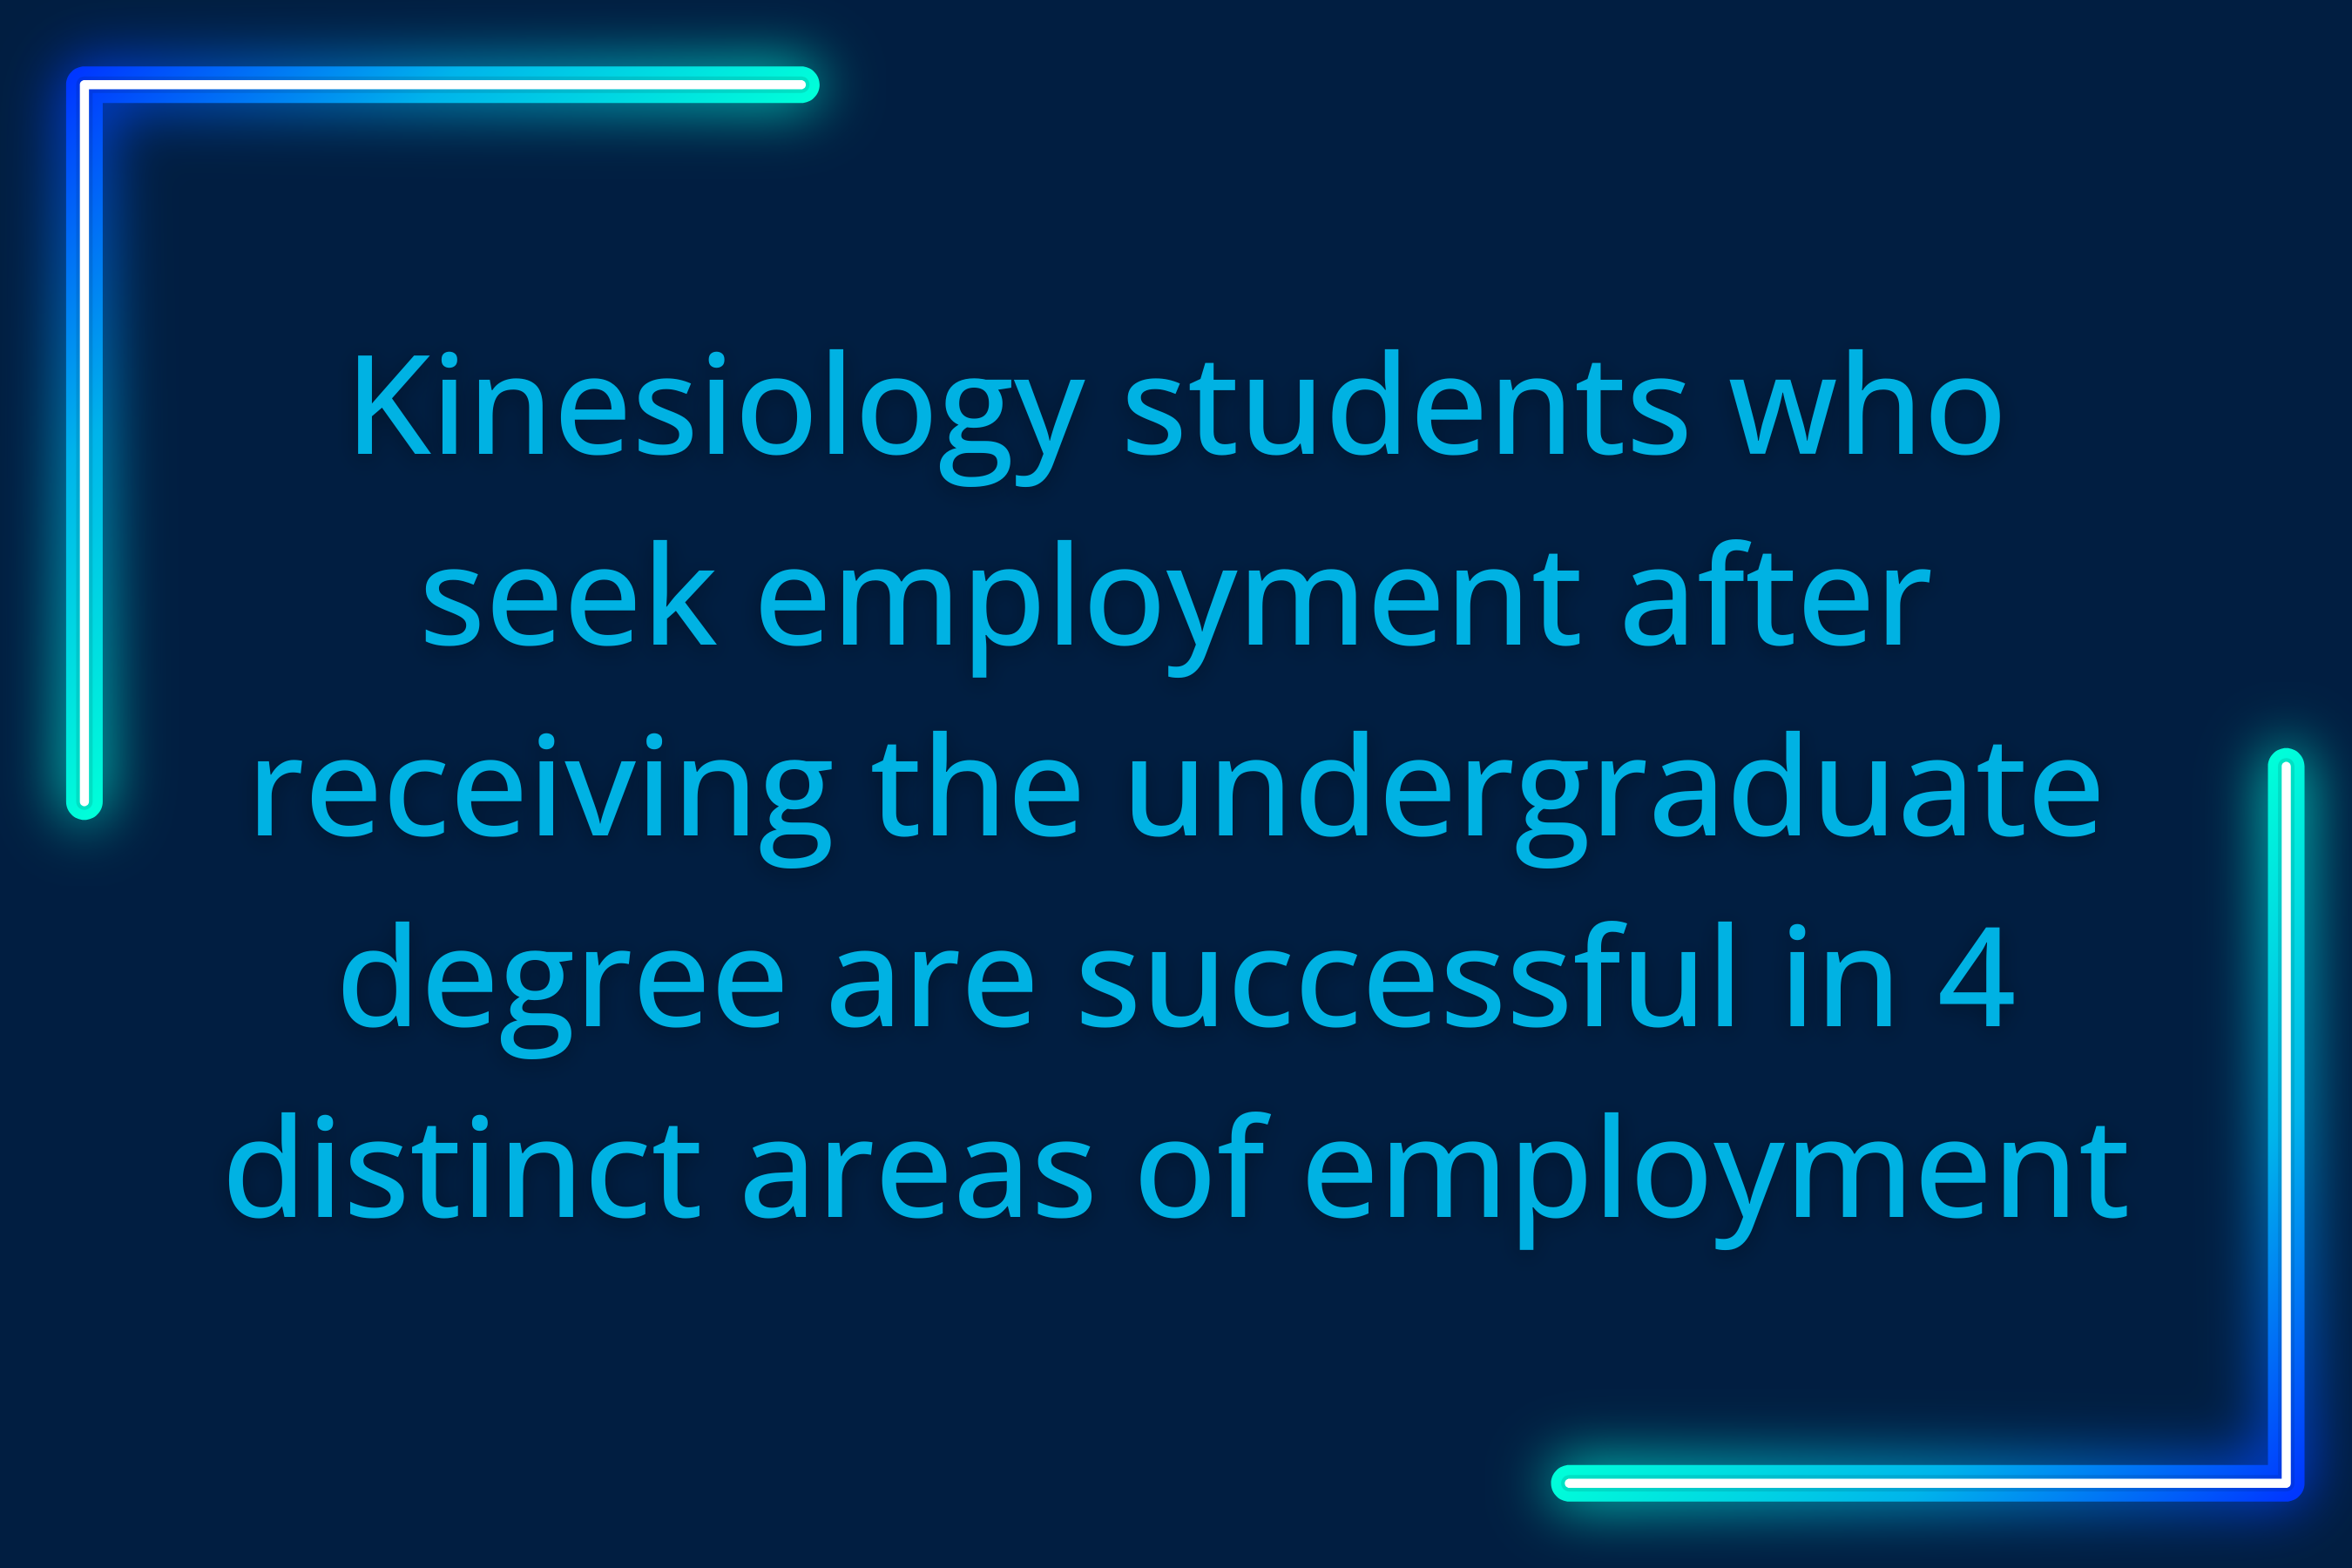 Kinesiology students who seek employment after receiving the undergraduate degree are successful in 4 distinct areas of employment: